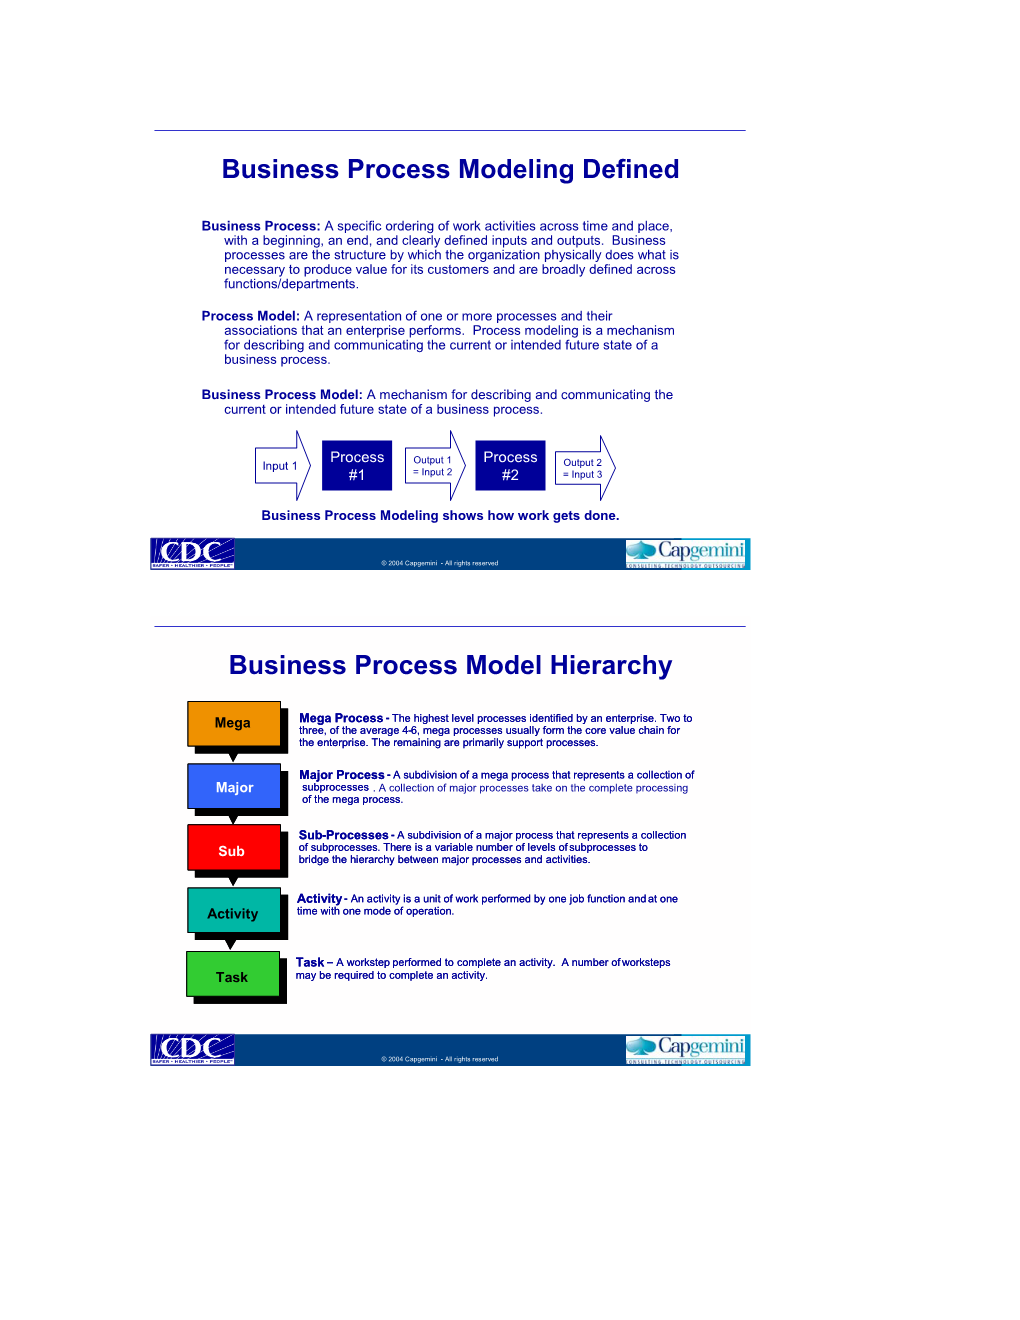 Business Process Modeling Defined